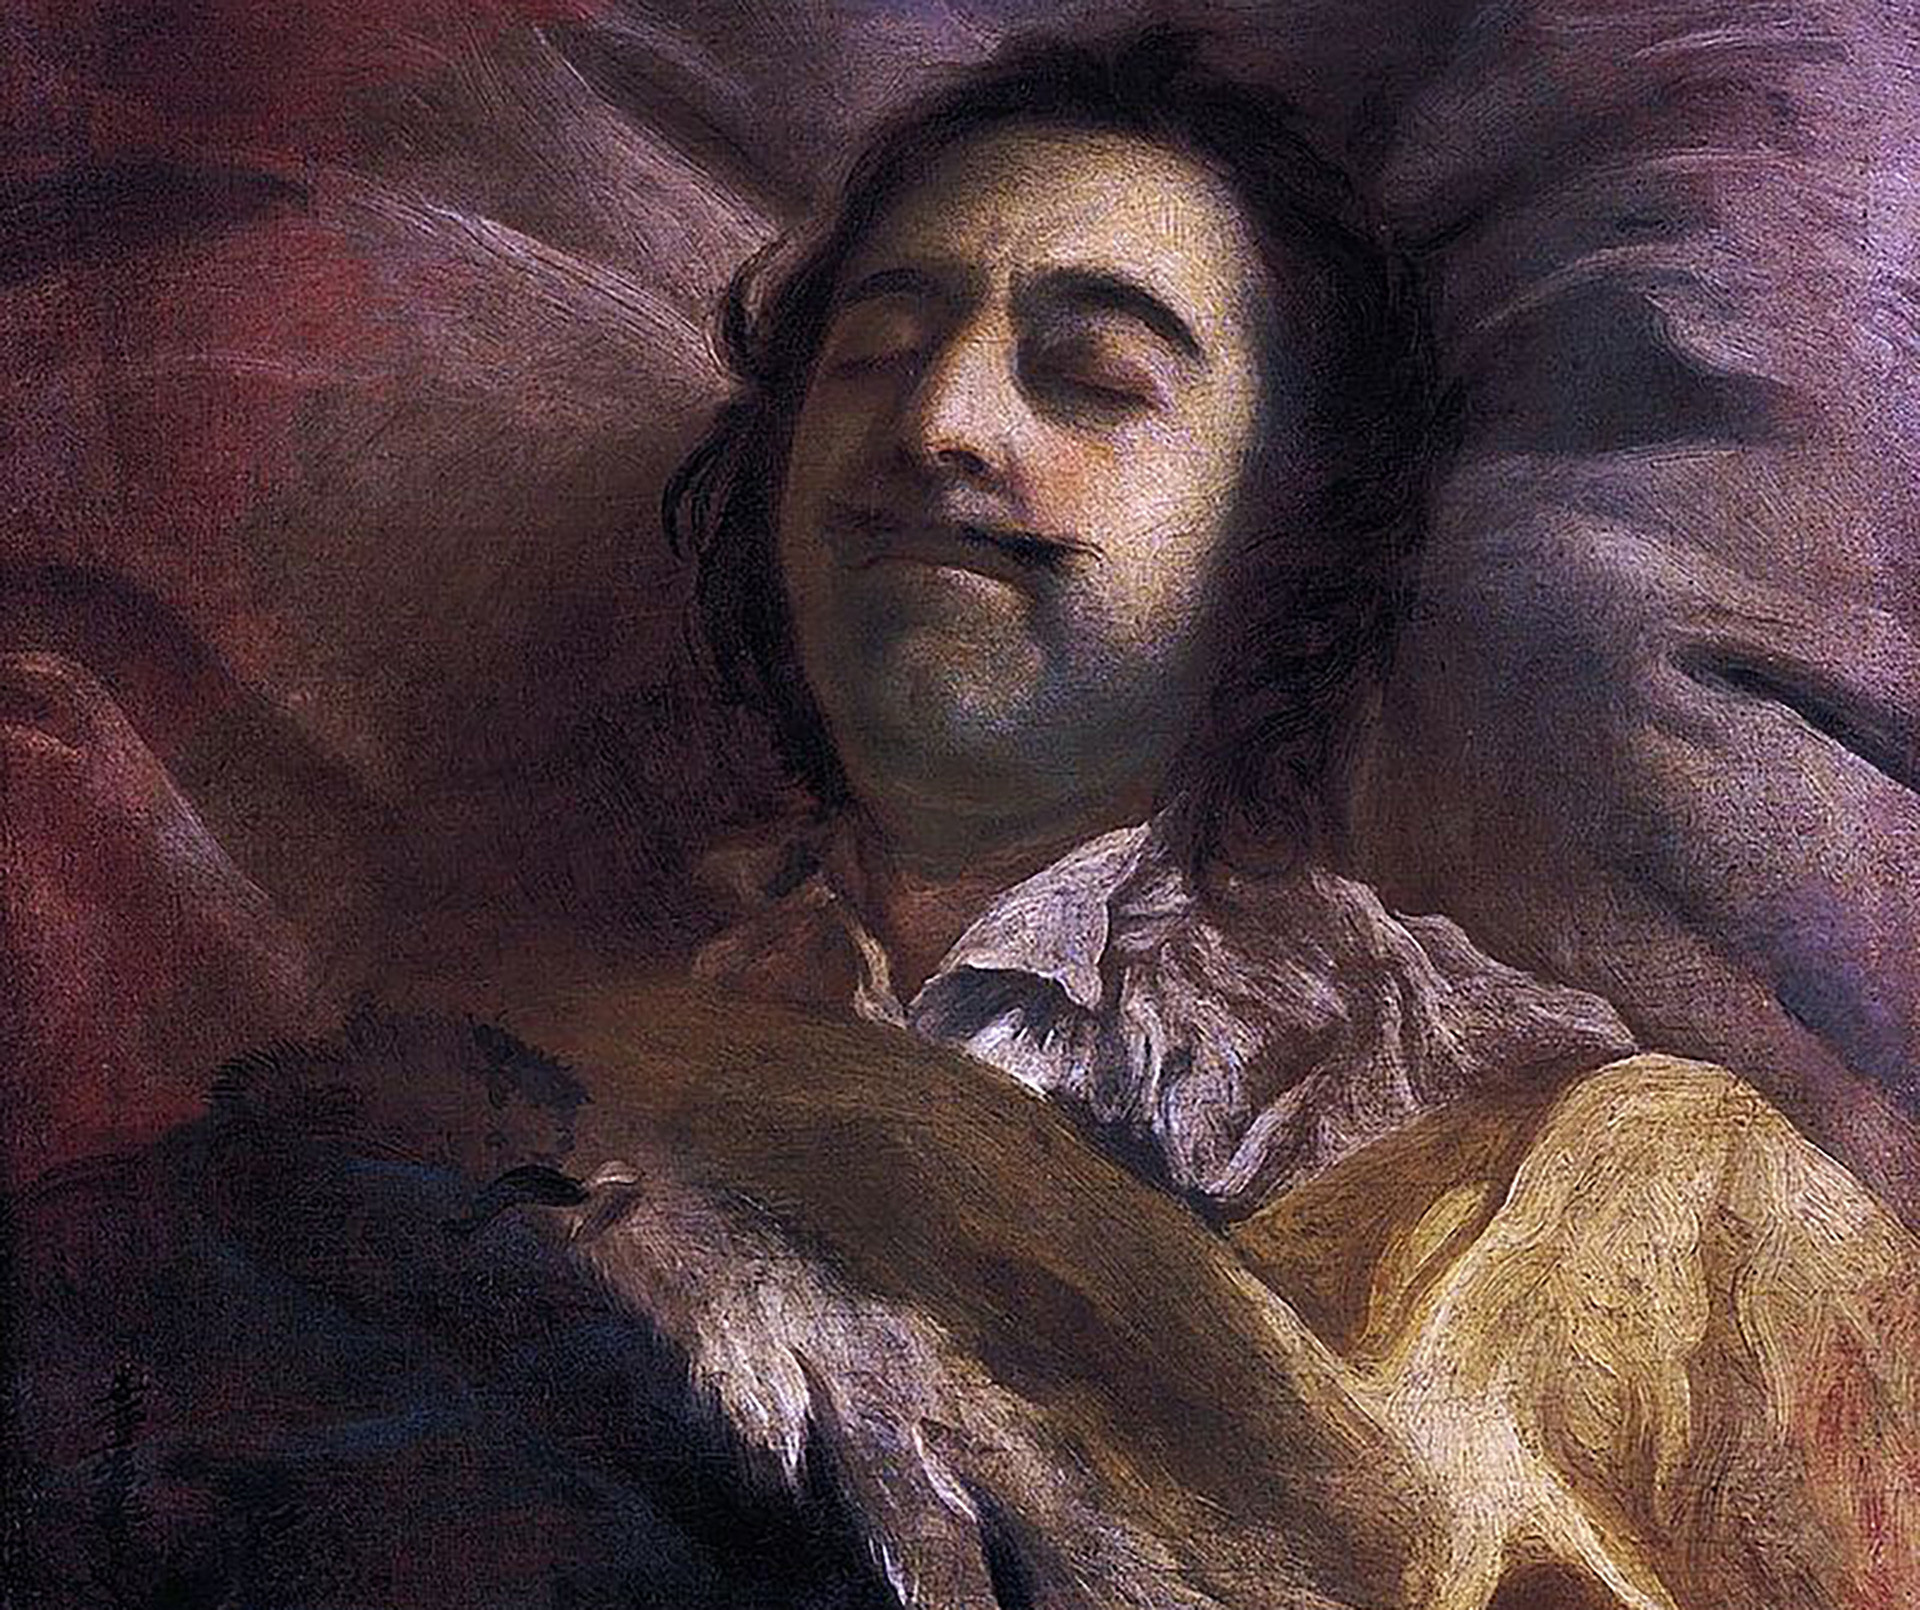 Peter I on his deathbed. Painting by Ivan Nikitin.